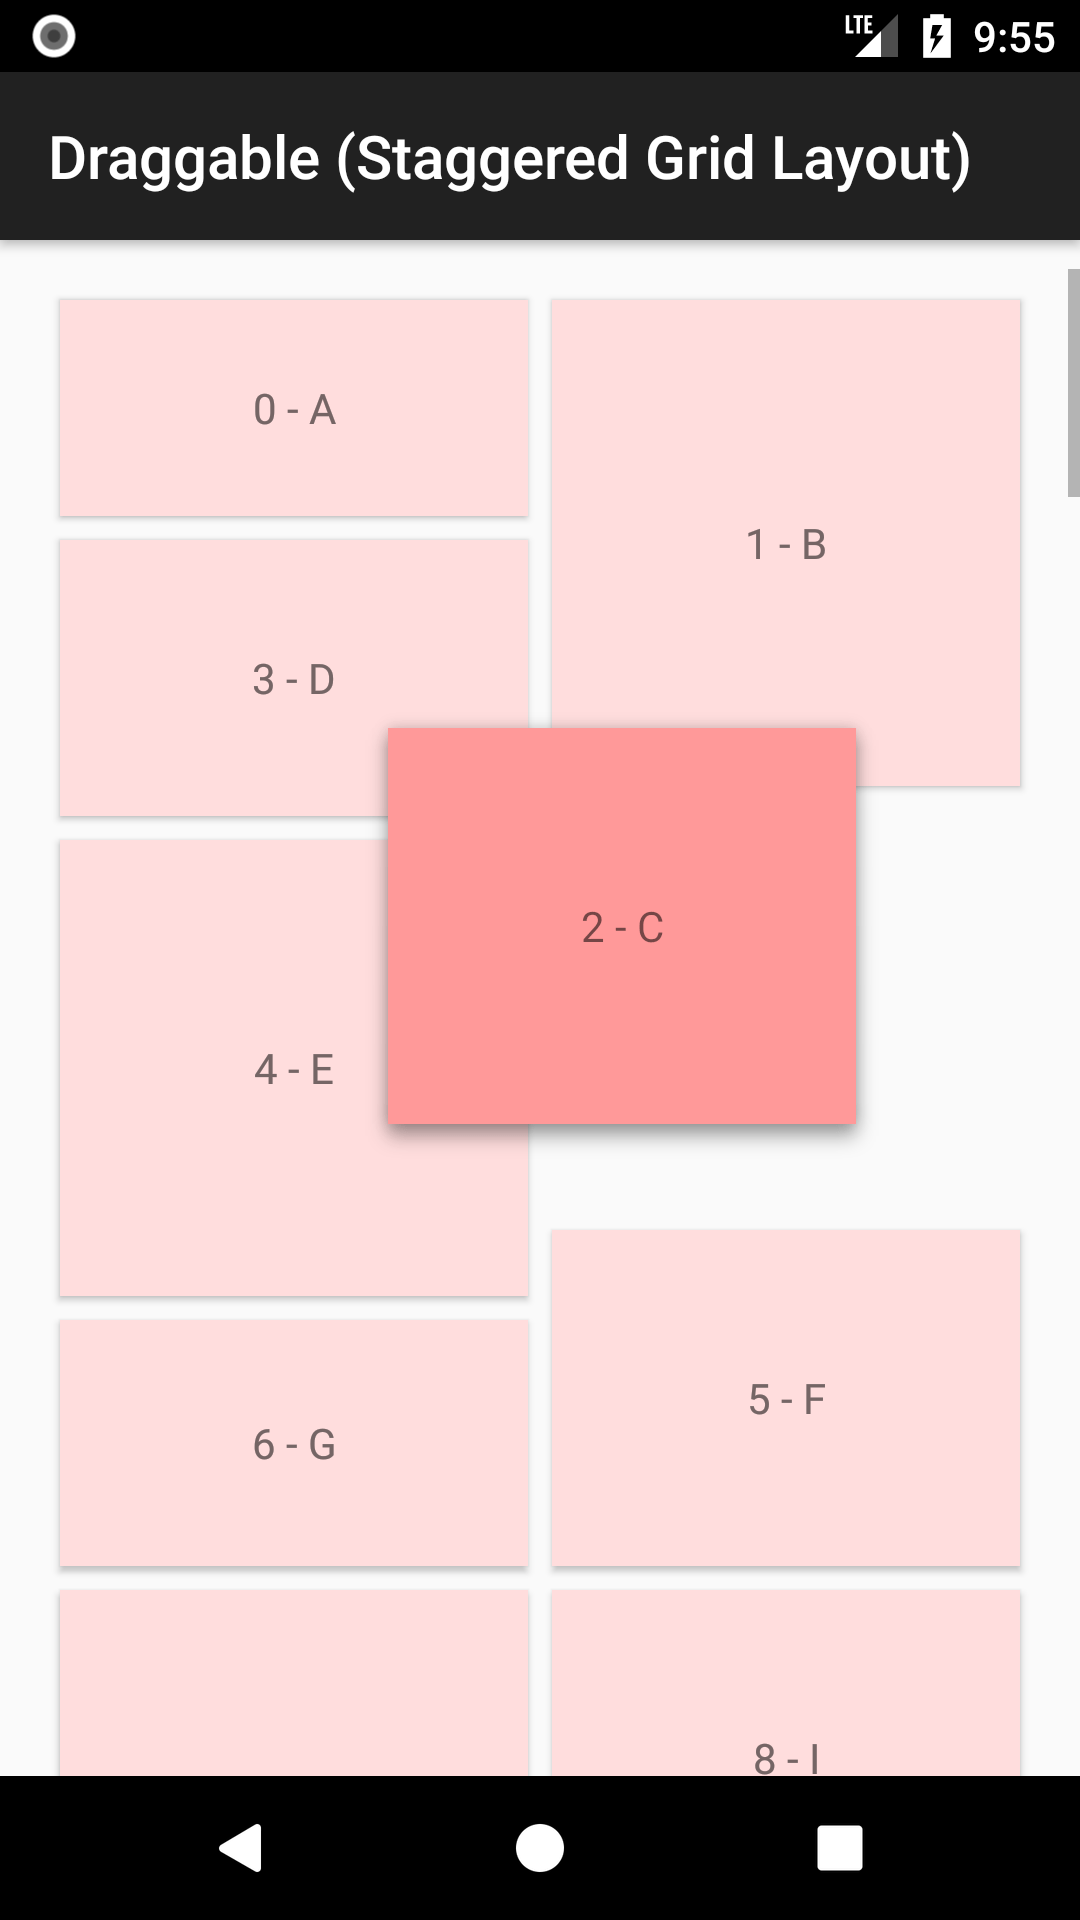 Screenshot 2 - Draggable (Staggered Grid Layout)